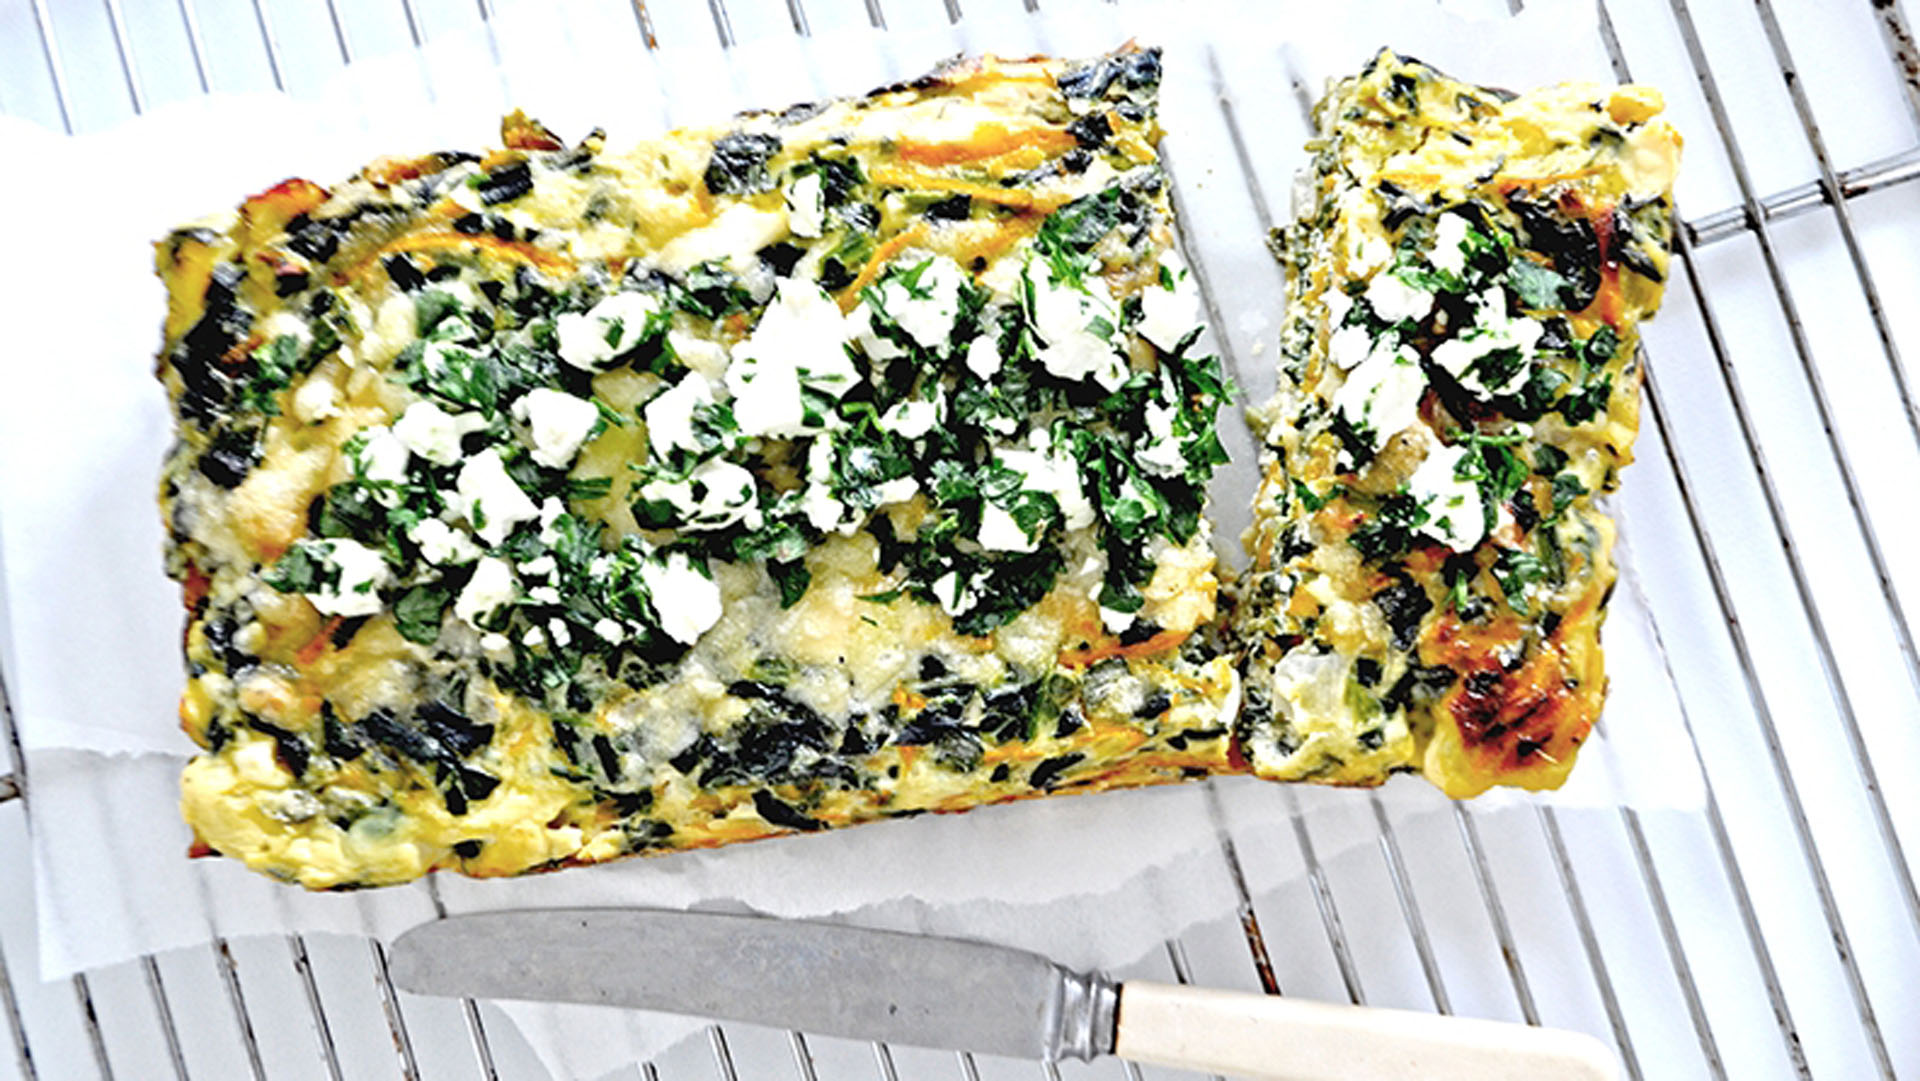 Healthy ideas for lunch: easy cheesy quiche